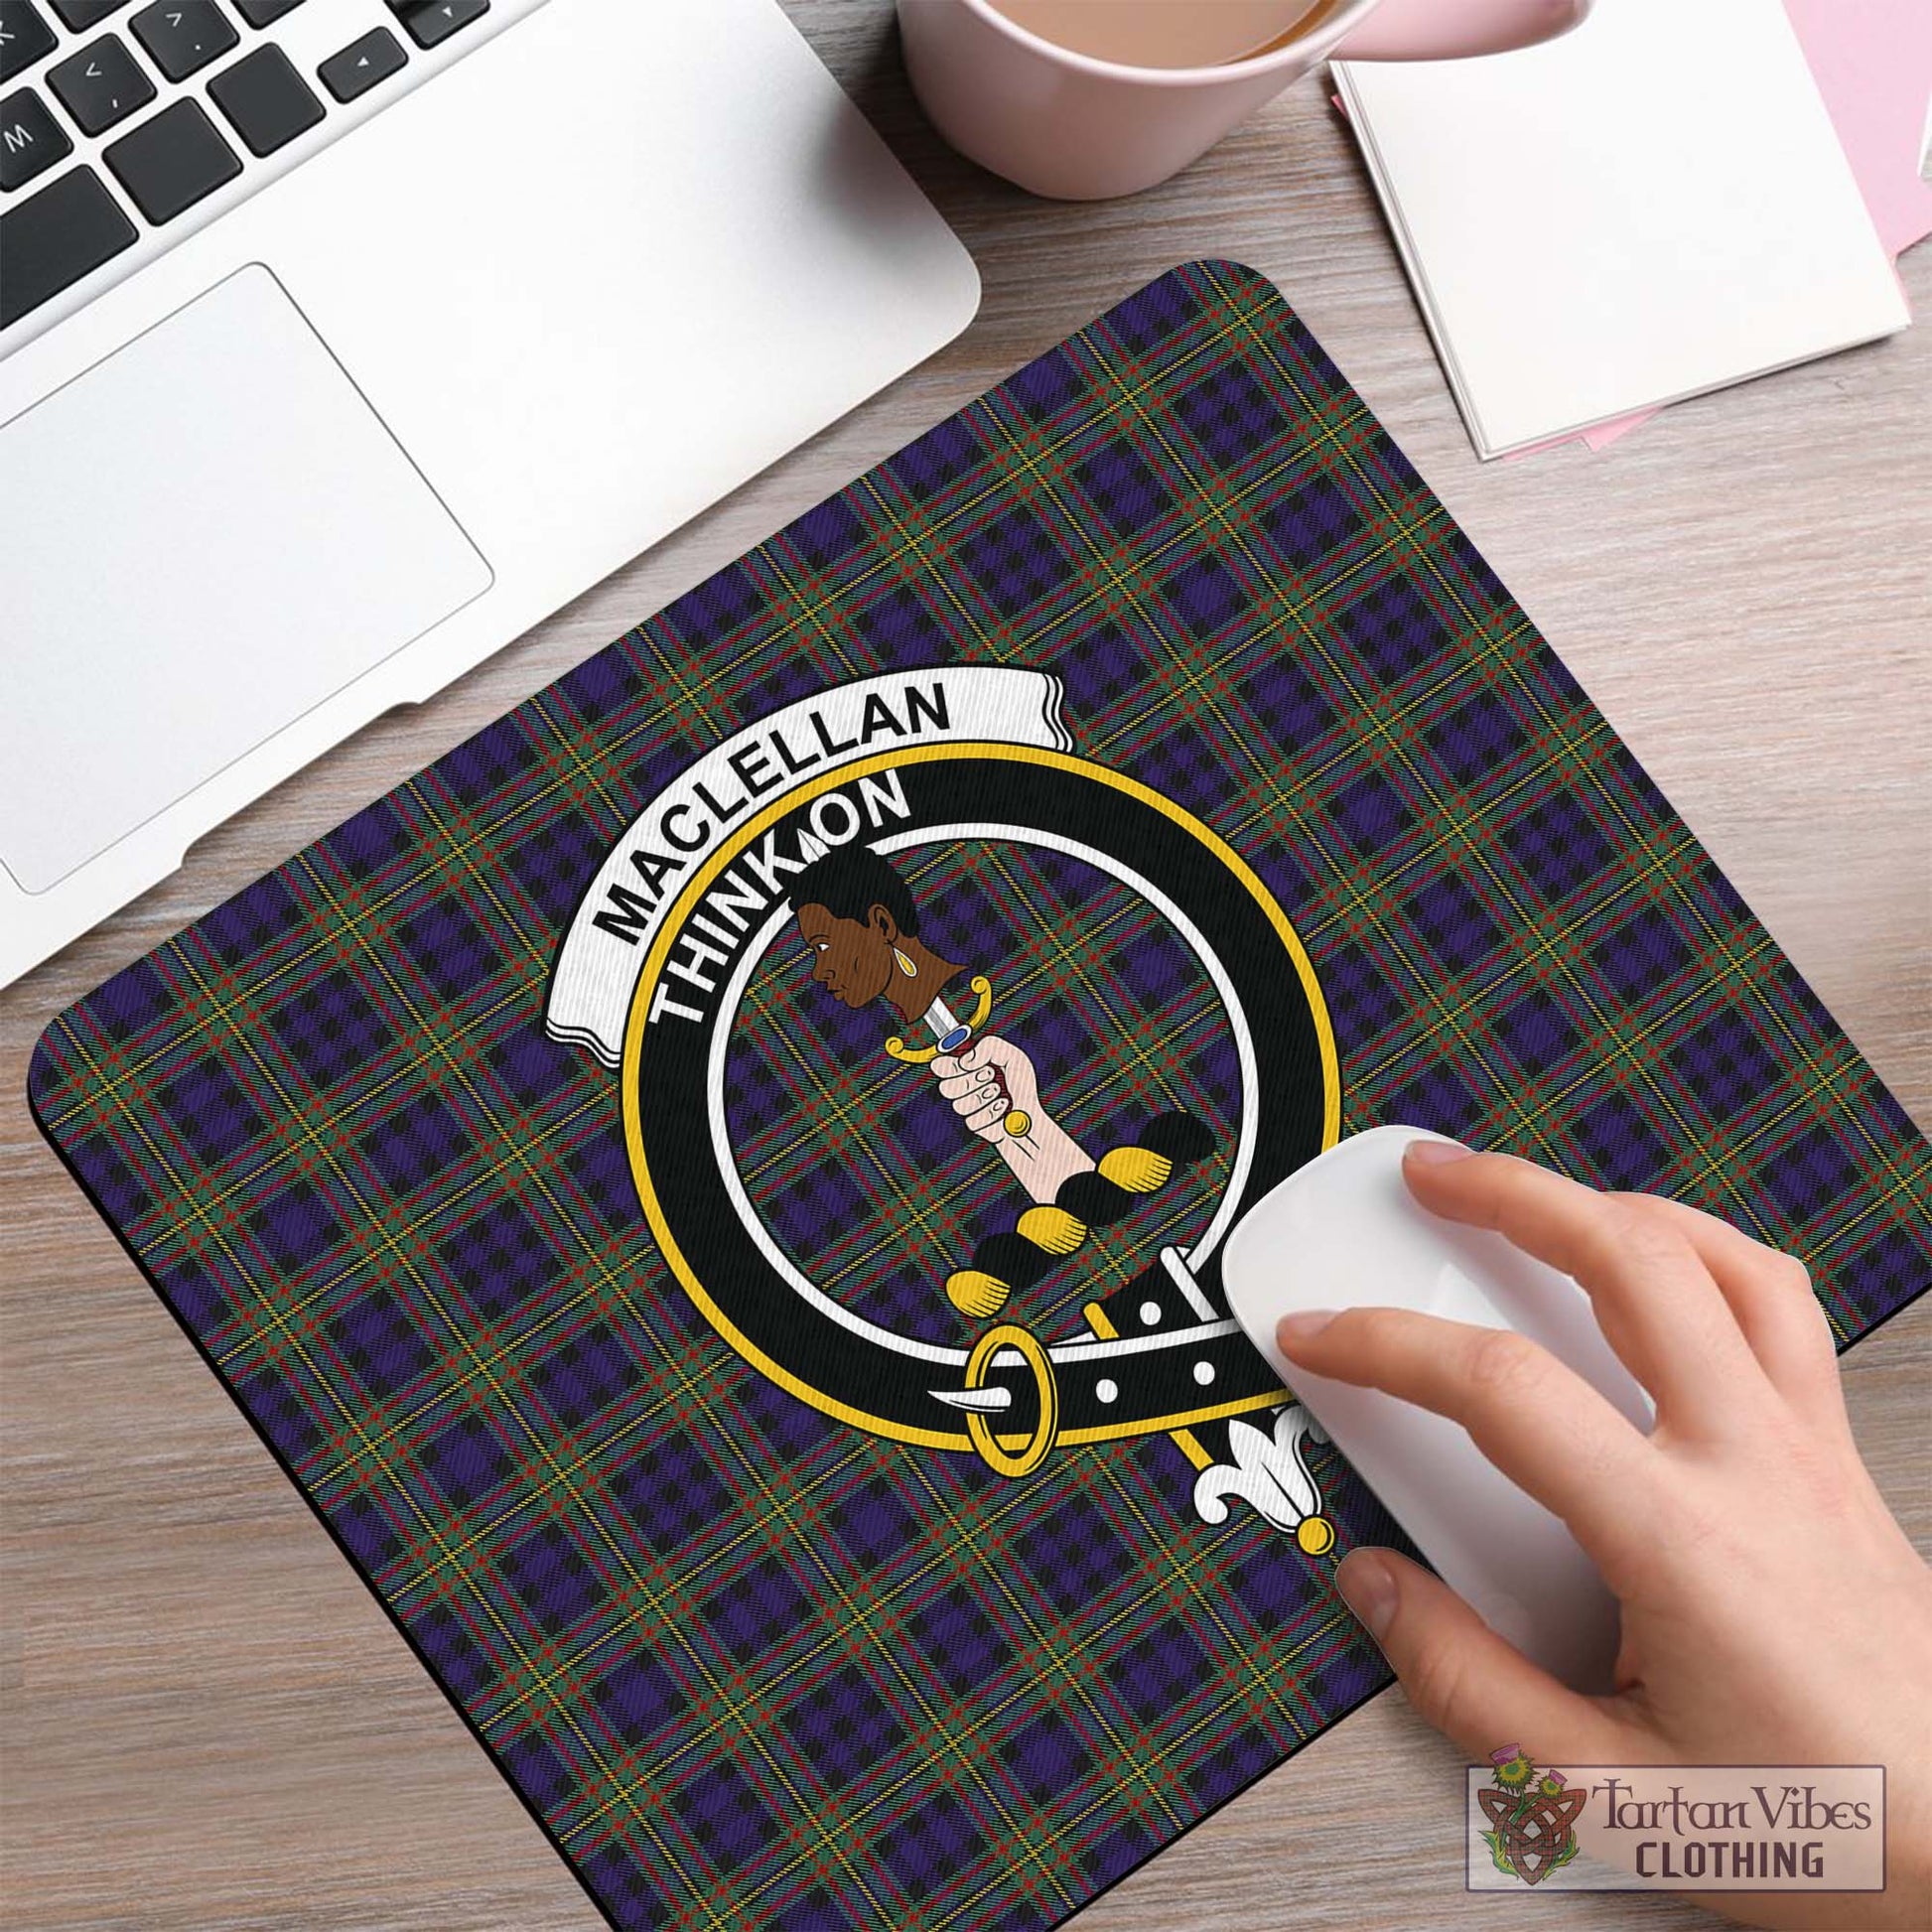 Tartan Vibes Clothing MacLellan Tartan Mouse Pad with Family Crest